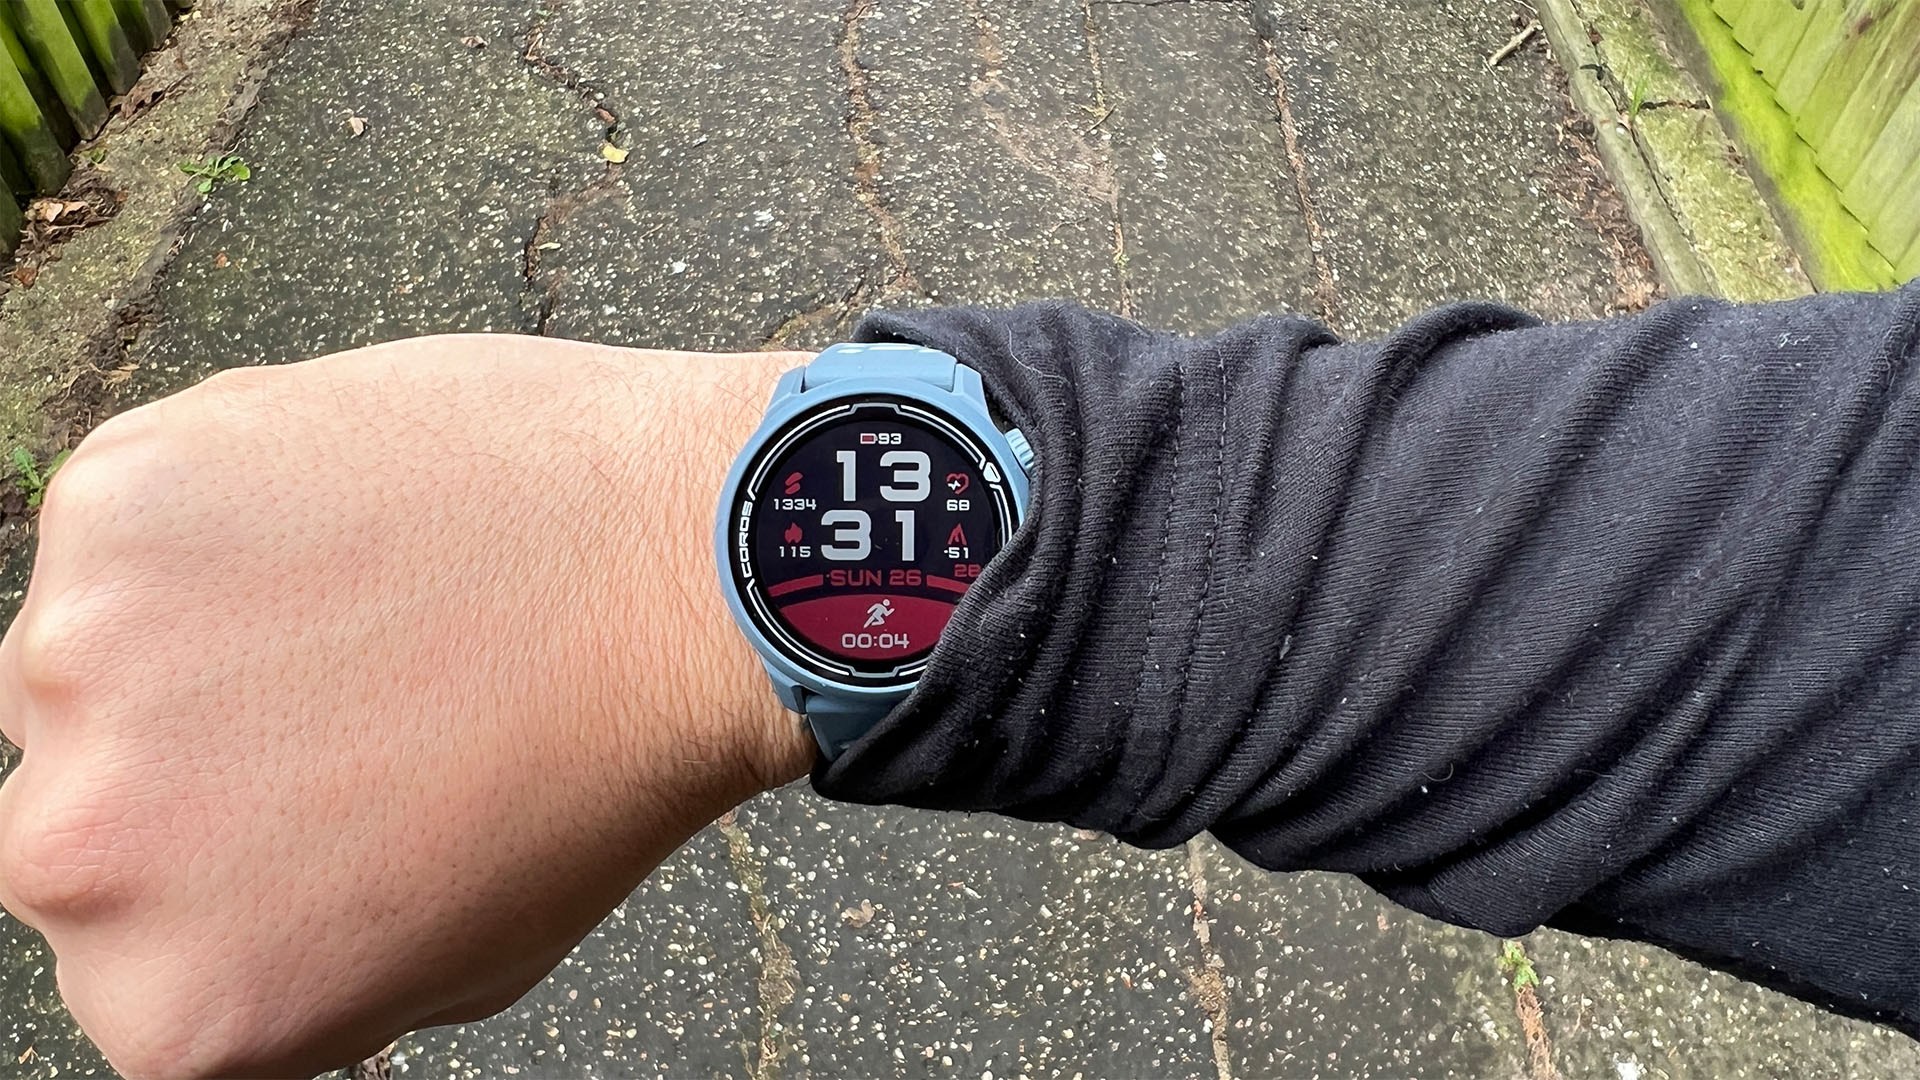 Coros Pace 3 Fitness Tracker Review - Consumer Reports